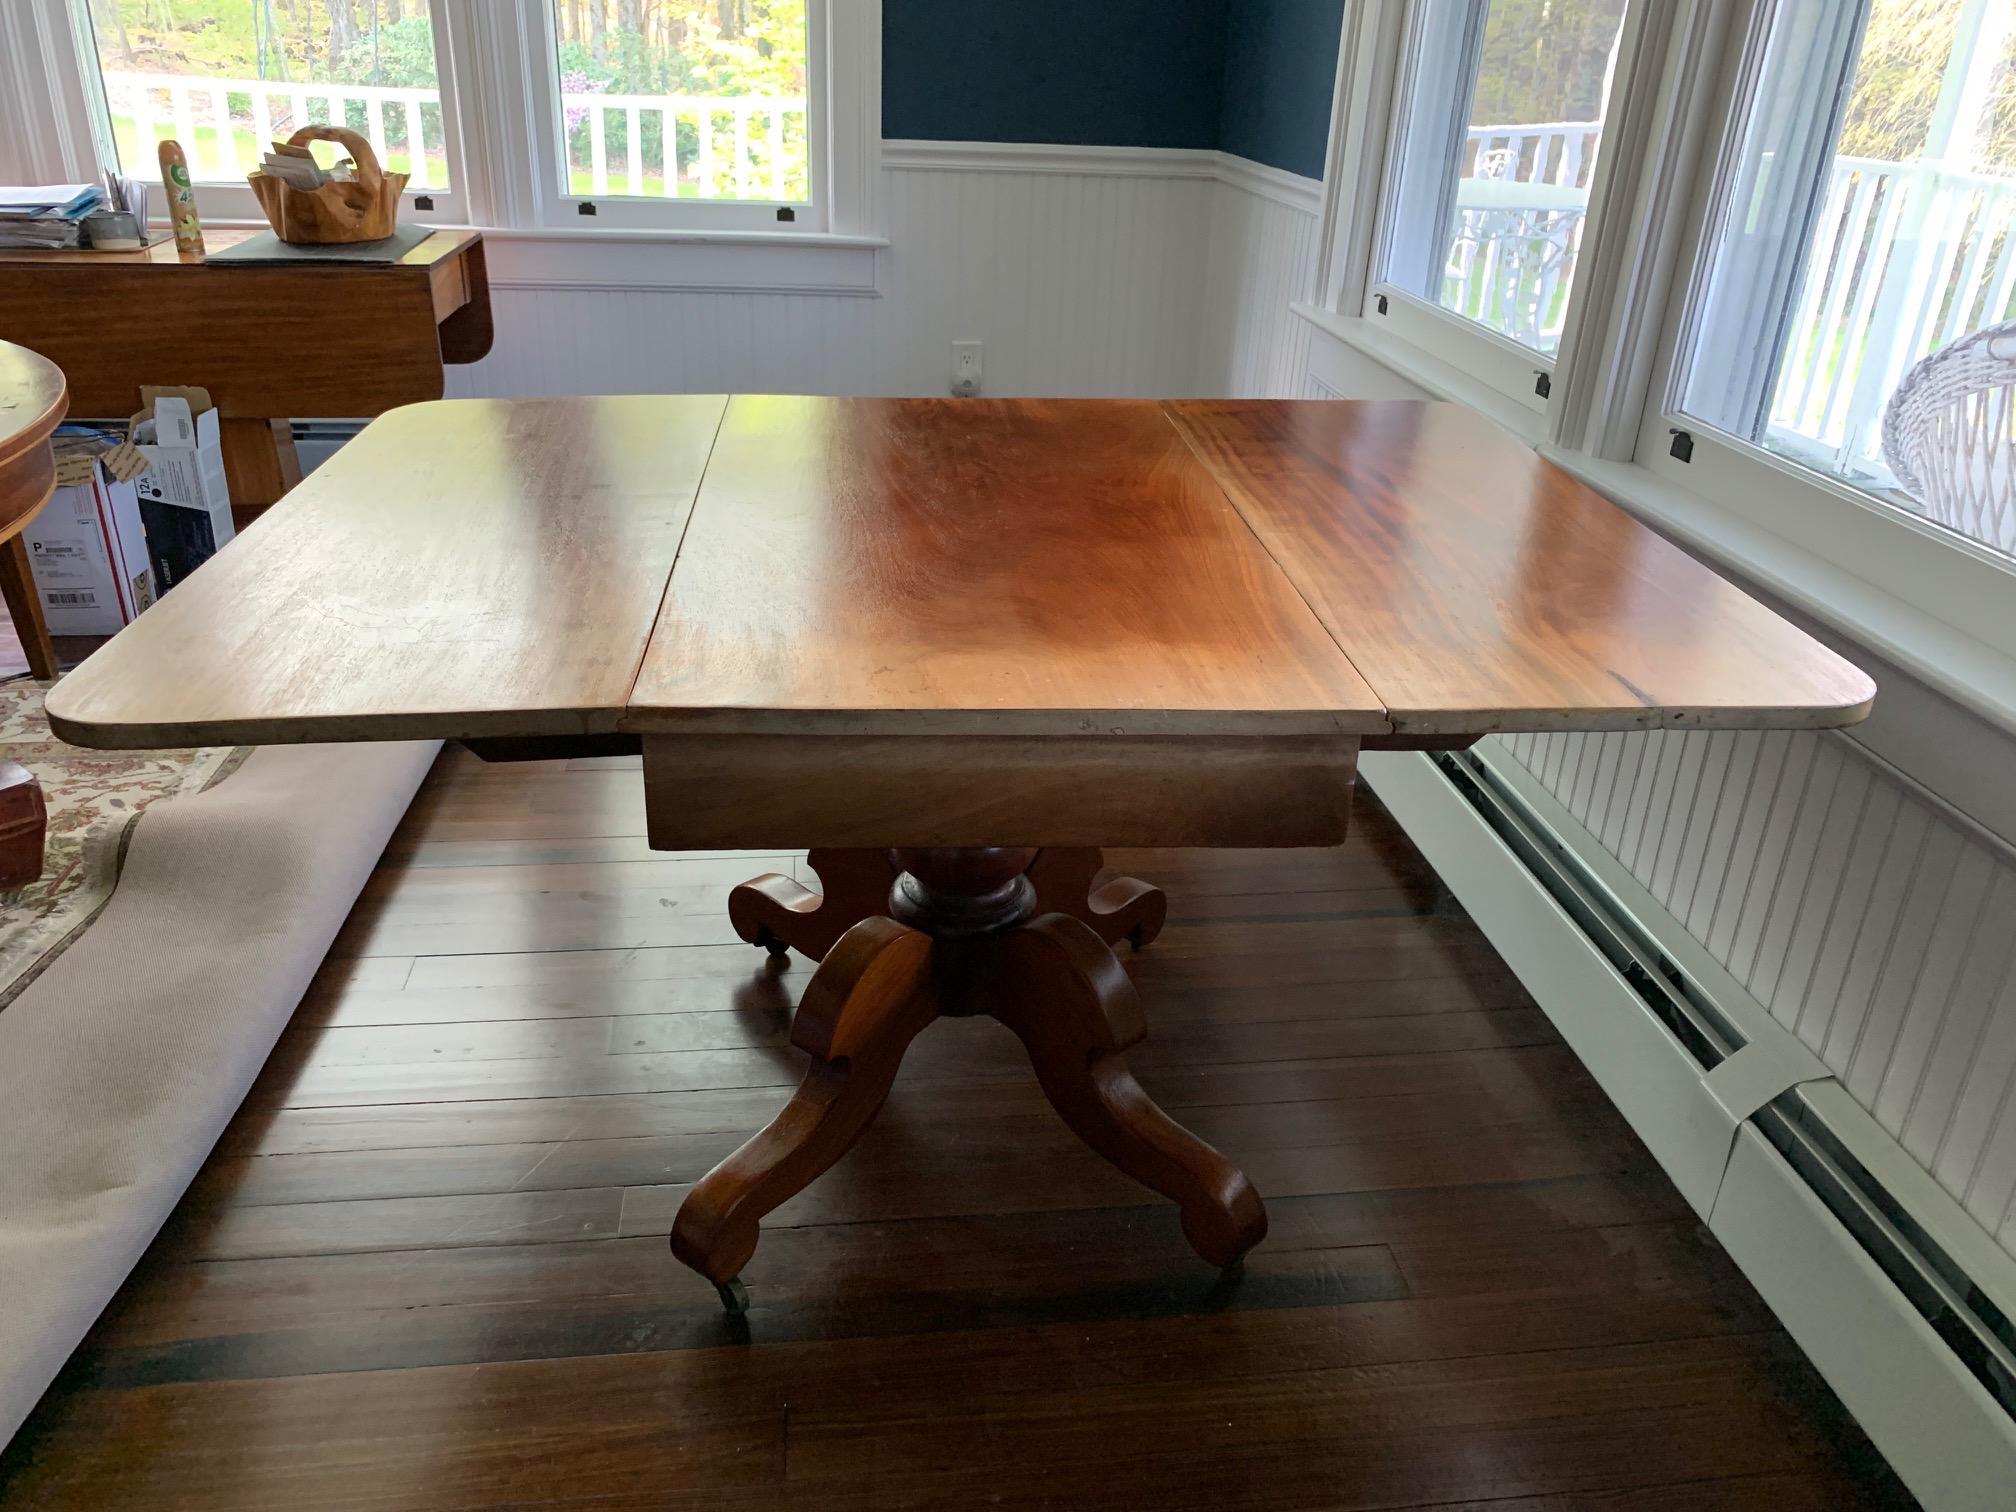 Large American drop leaf pedestal breakfast table, late 19th c.
Beautiful drop leaf table with central pedestal of four scrolling legs on casters. Probably an American maple. Considerable fading on one side of table. Good stable condition otherwise.